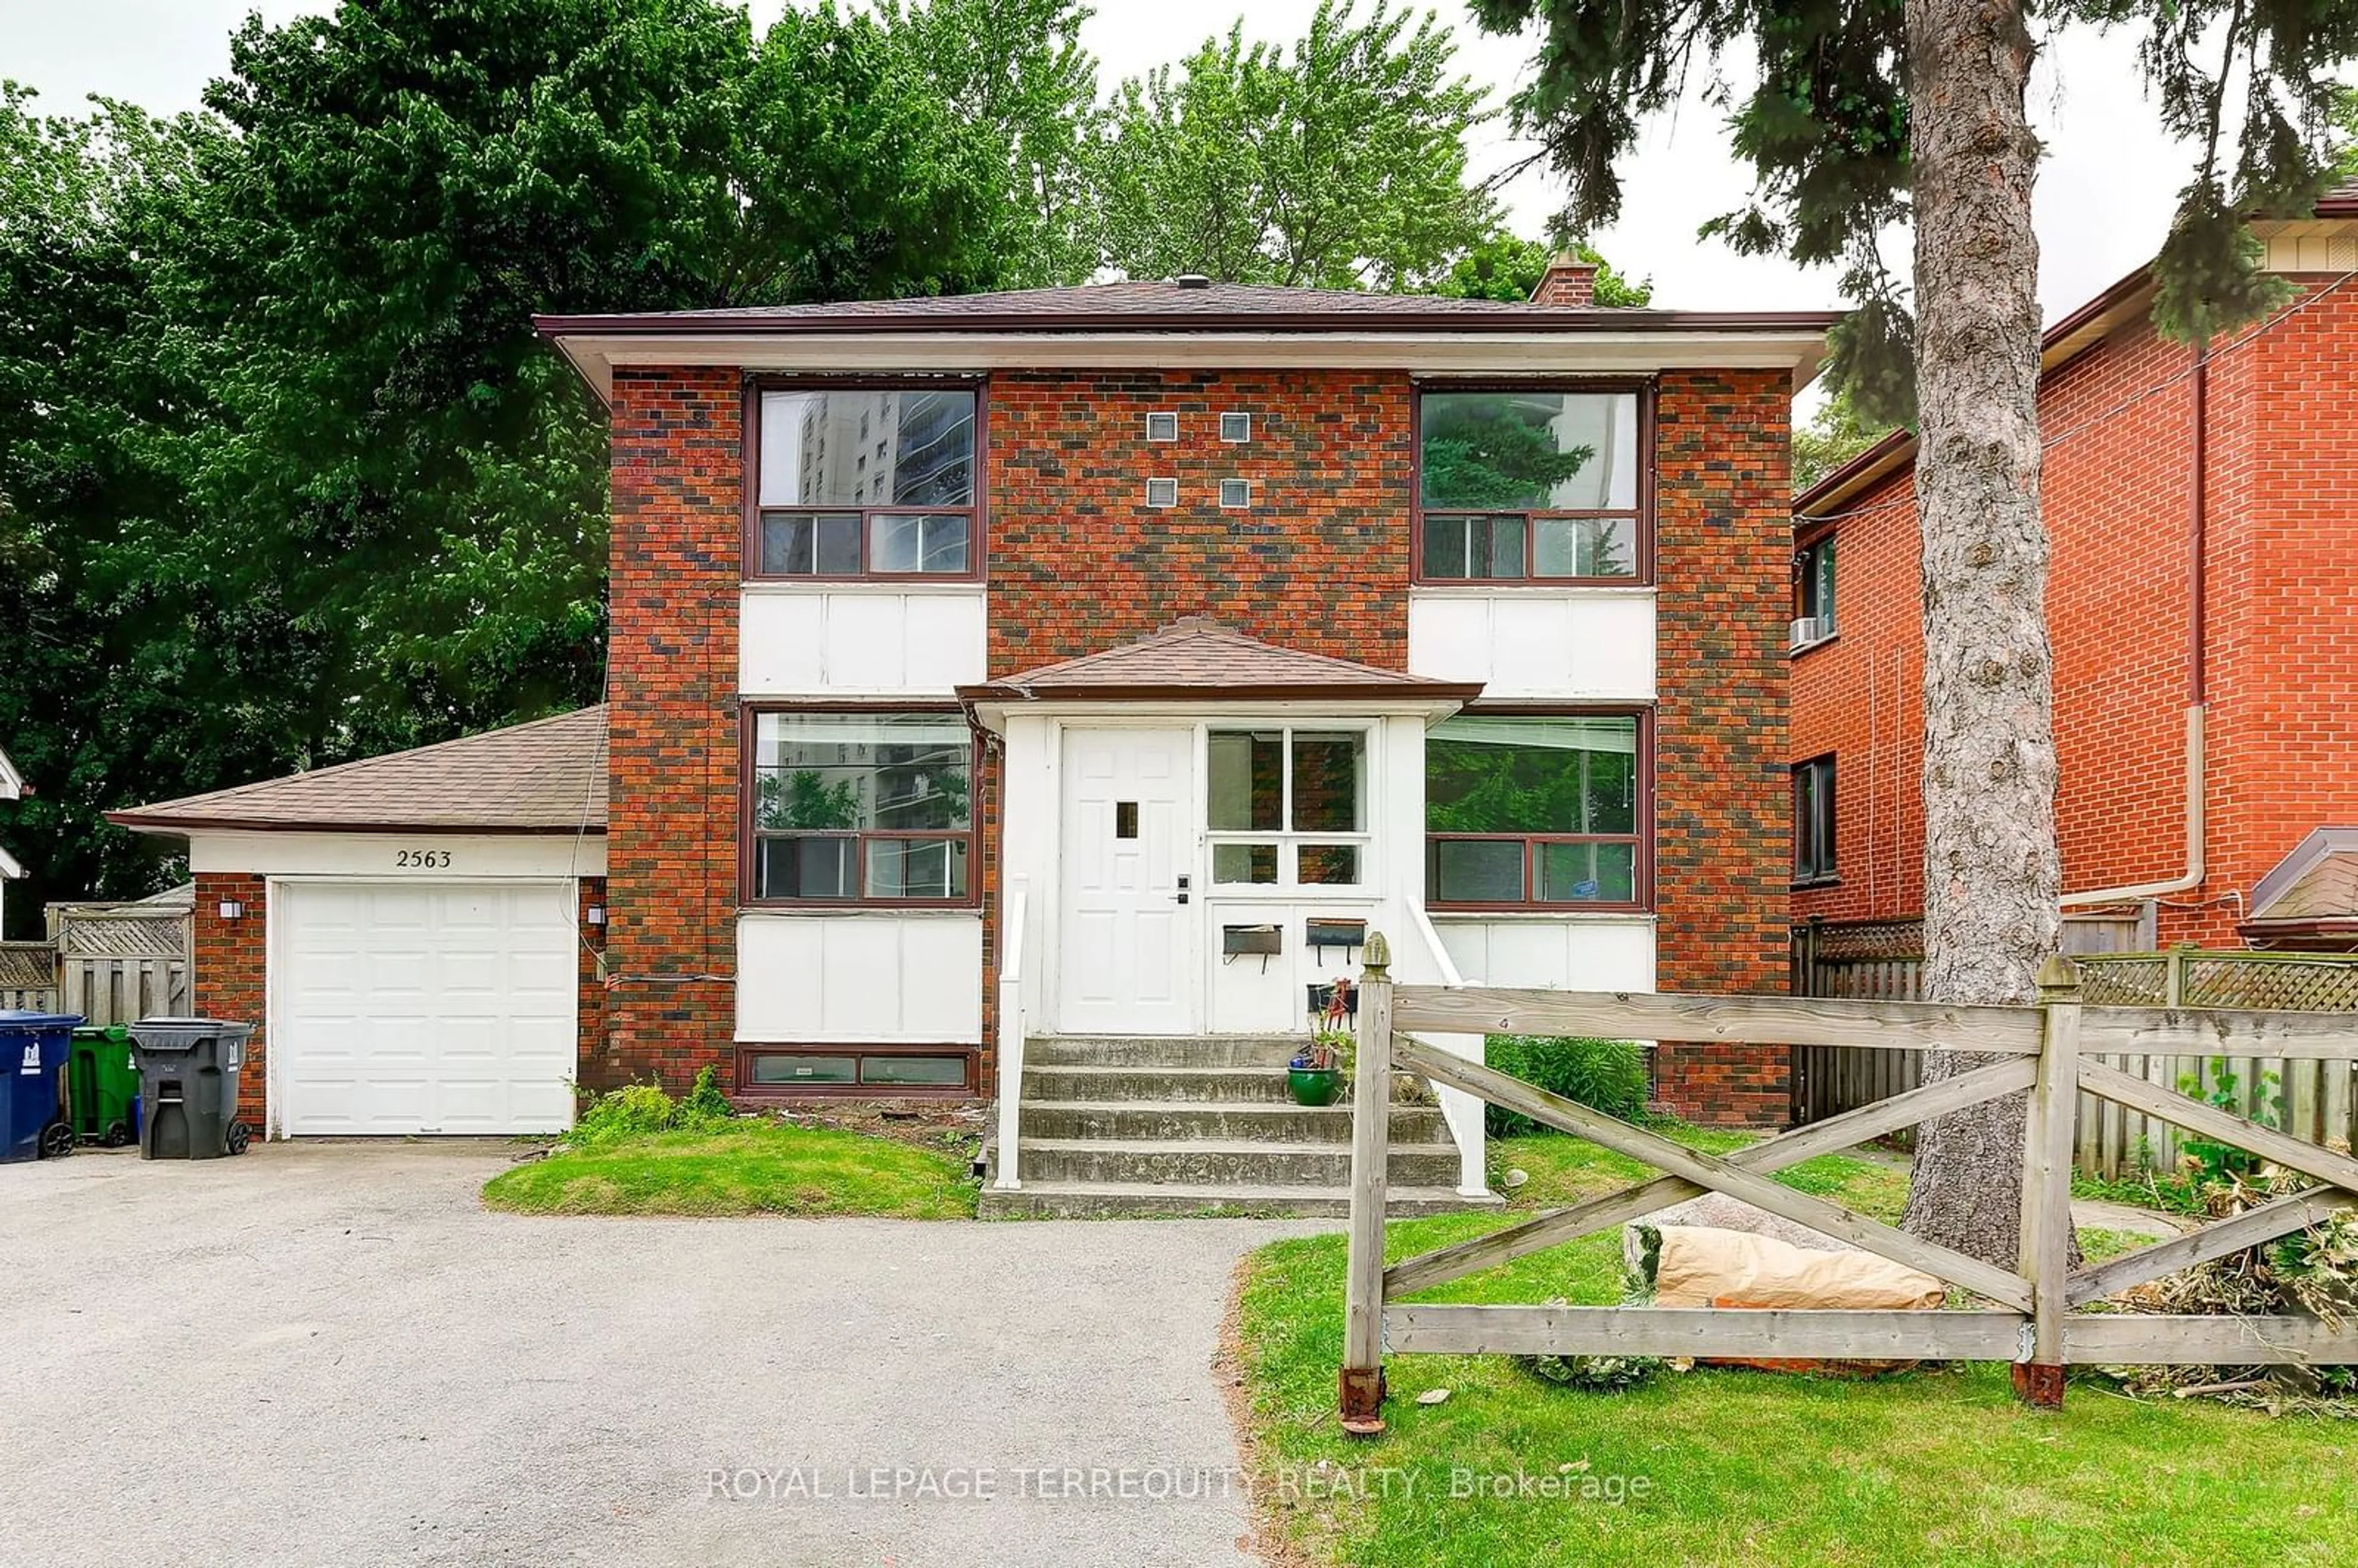 Home with brick exterior material for 2563 Kingston Rd, Toronto Ontario M1M 1M1